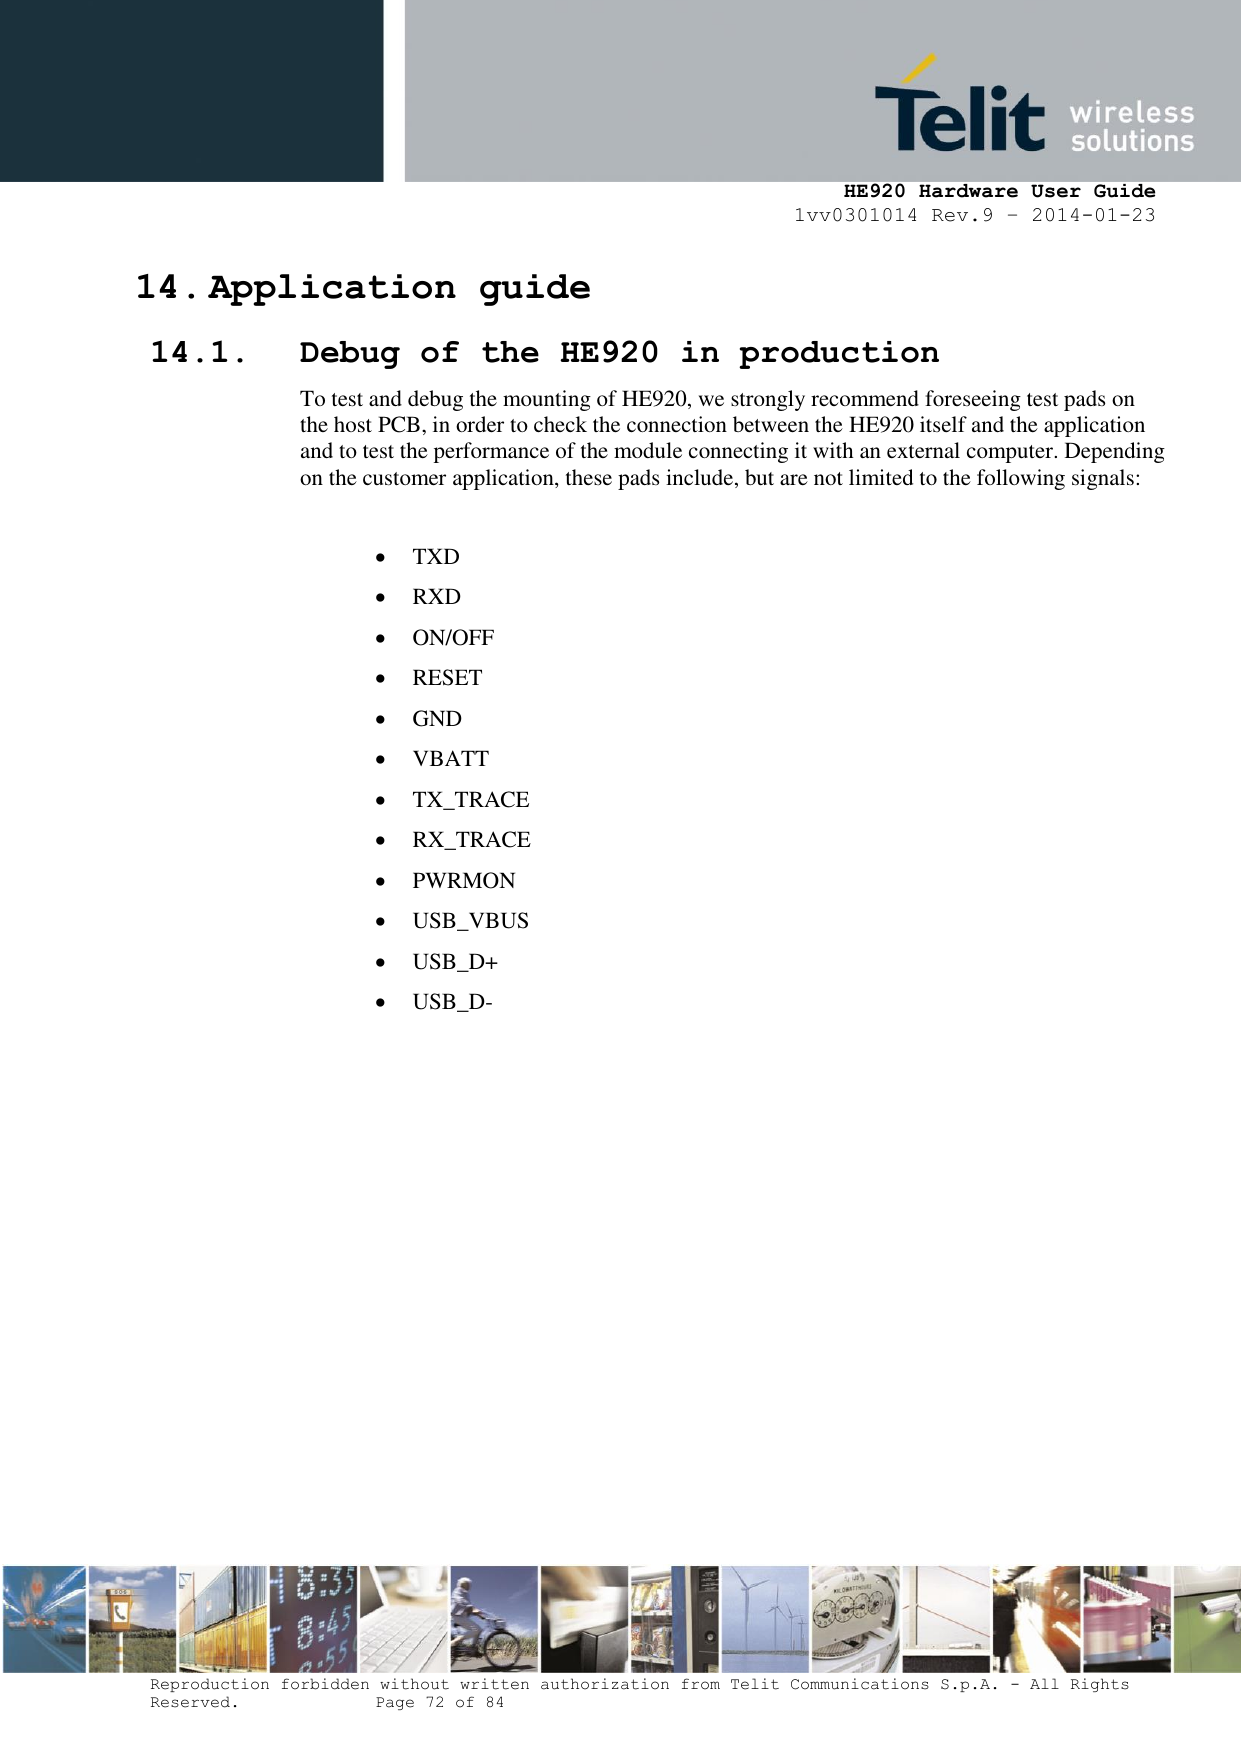     HE920 Hardware User Guide 1vv0301014 Rev.9 – 2014-01-23 Reproduction forbidden without written authorization from Telit Communications S.p.A. - All Rights Reserved.    Page 72 of 84  14. Application guide 14.1. Debug of the HE920 in production To test and debug the mounting of HE920, we strongly recommend foreseeing test pads on the host PCB, in order to check the connection between the HE920 itself and the application and to test the performance of the module connecting it with an external computer. Depending on the customer application, these pads include, but are not limited to the following signals:   TXD  RXD  ON/OFF  RESET  GND  VBATT  TX_TRACE  RX_TRACE  PWRMON   USB_VBUS  USB_D+  USB_D- 